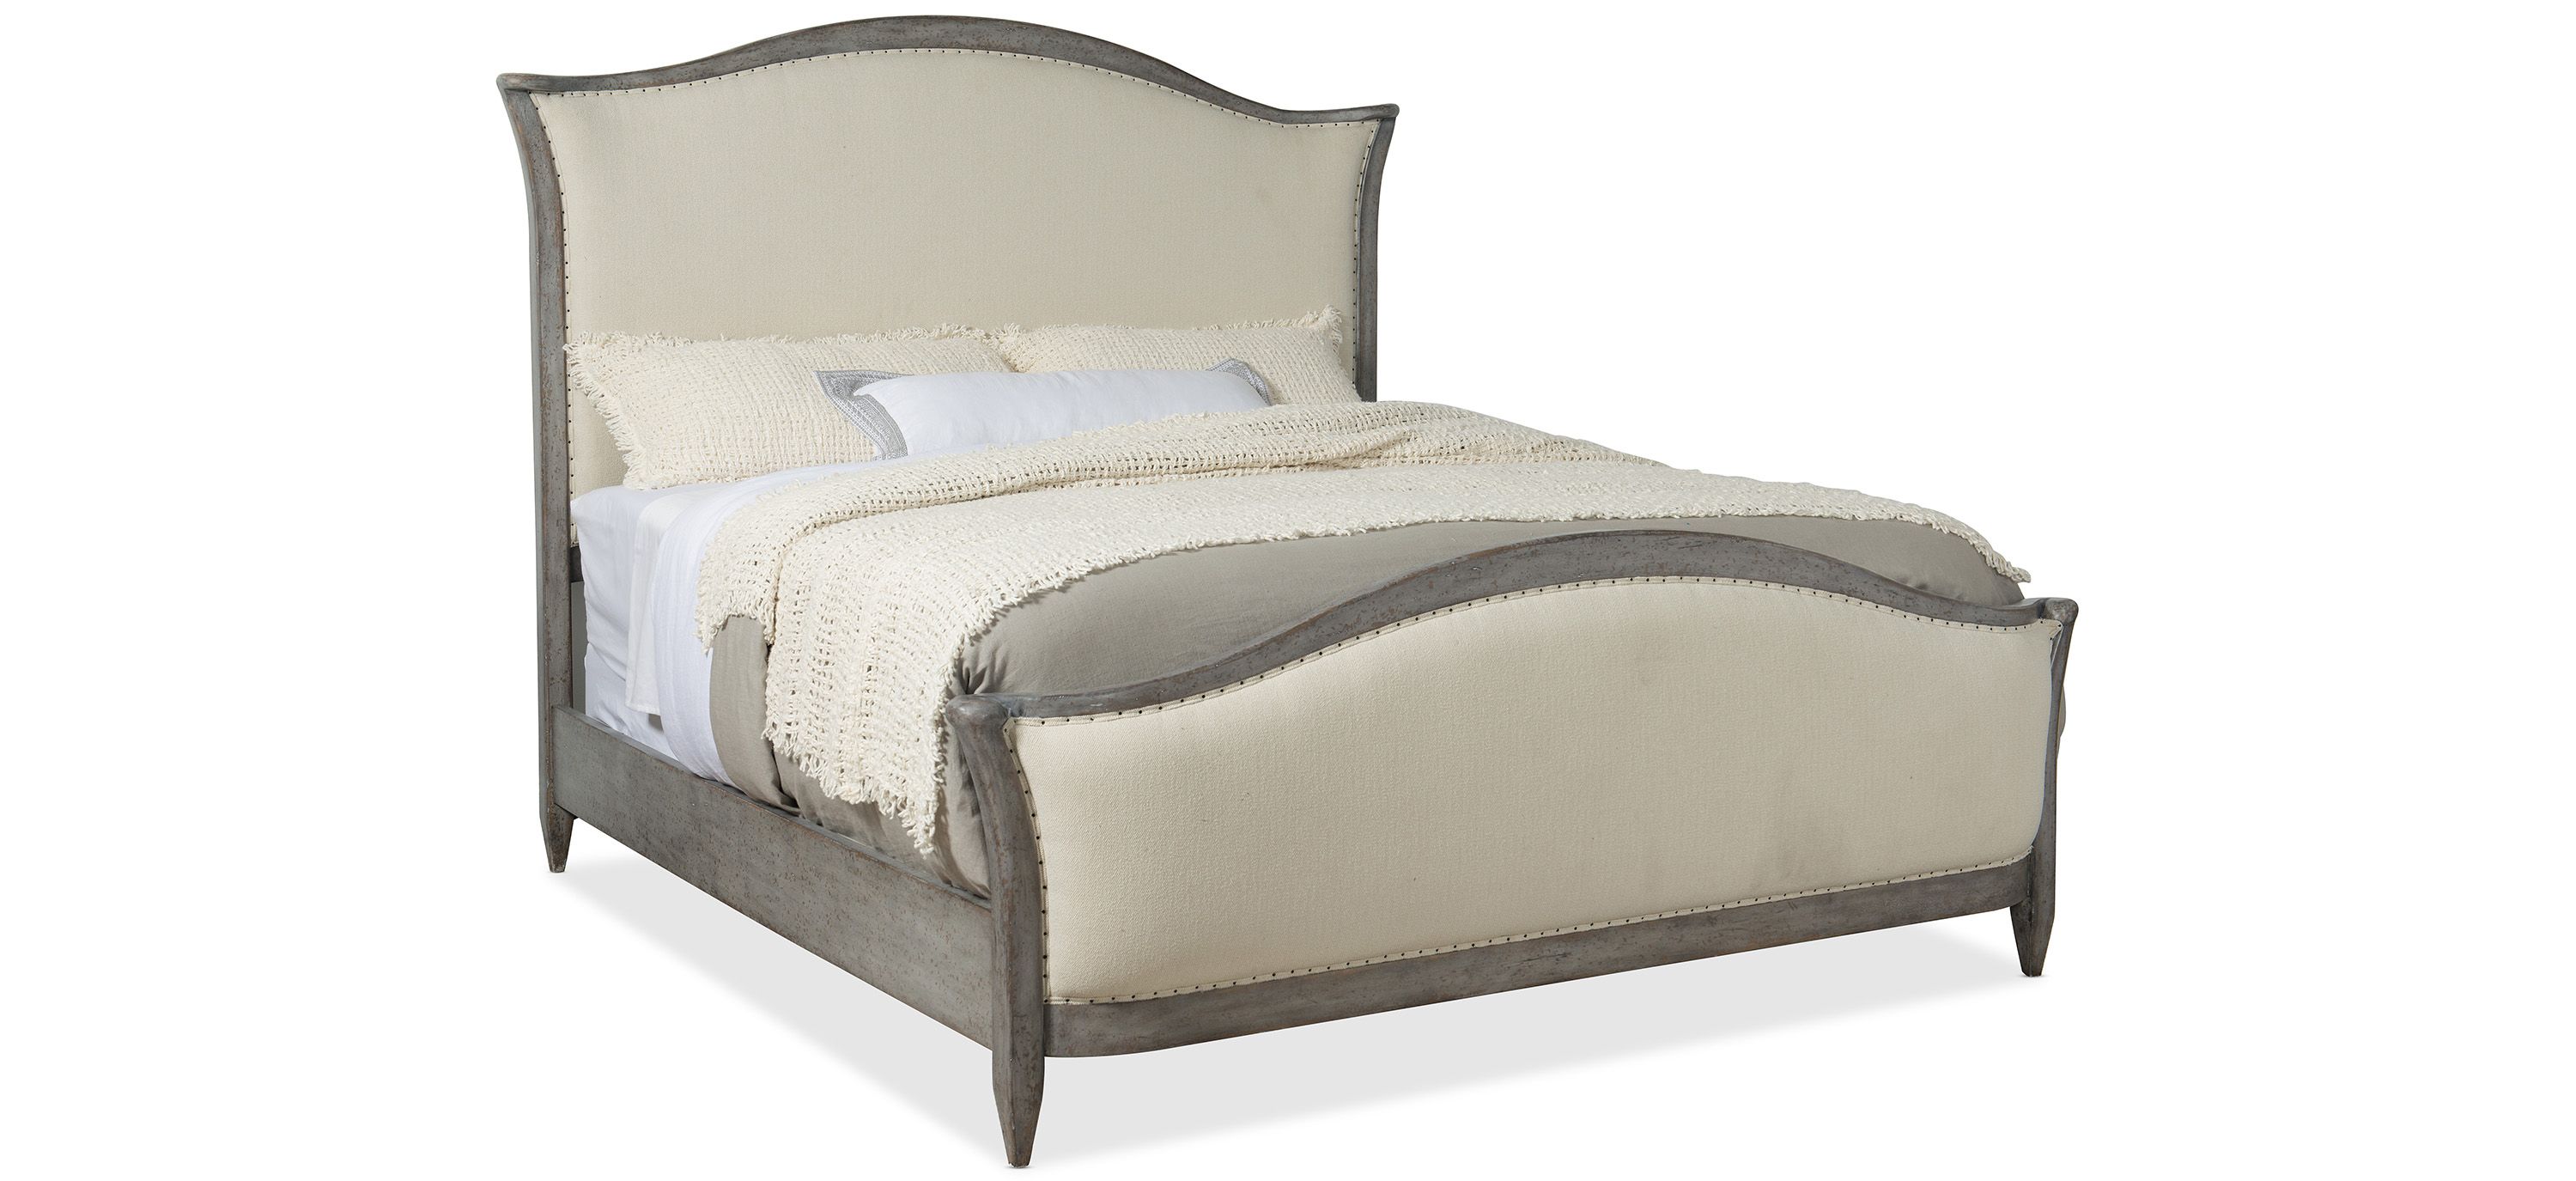 Ciao Bella Cal King Upholstered Bed